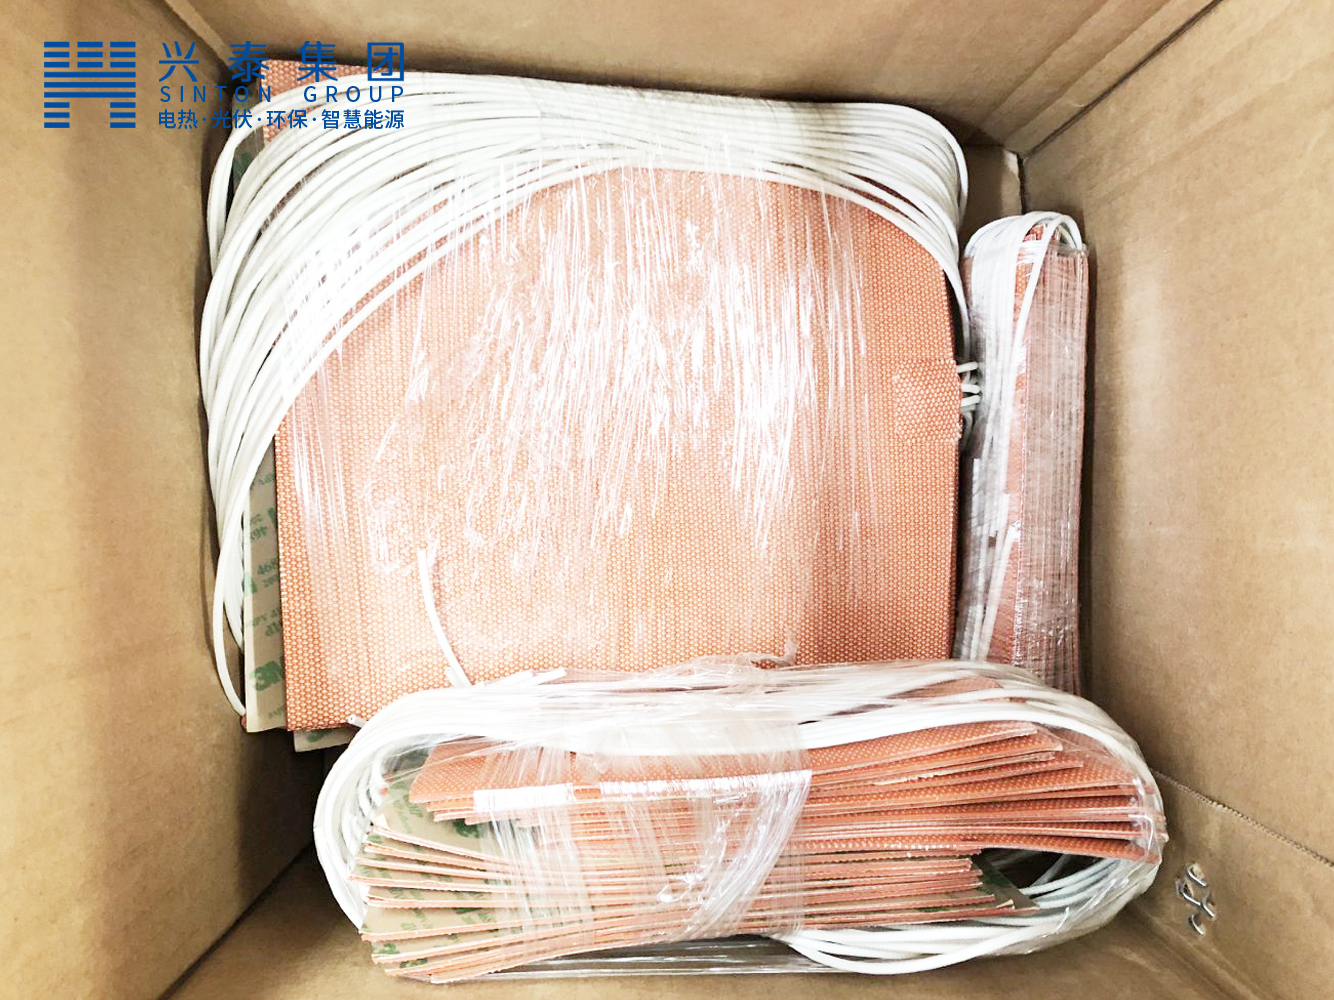 silicone rubber heaters (15).jpg